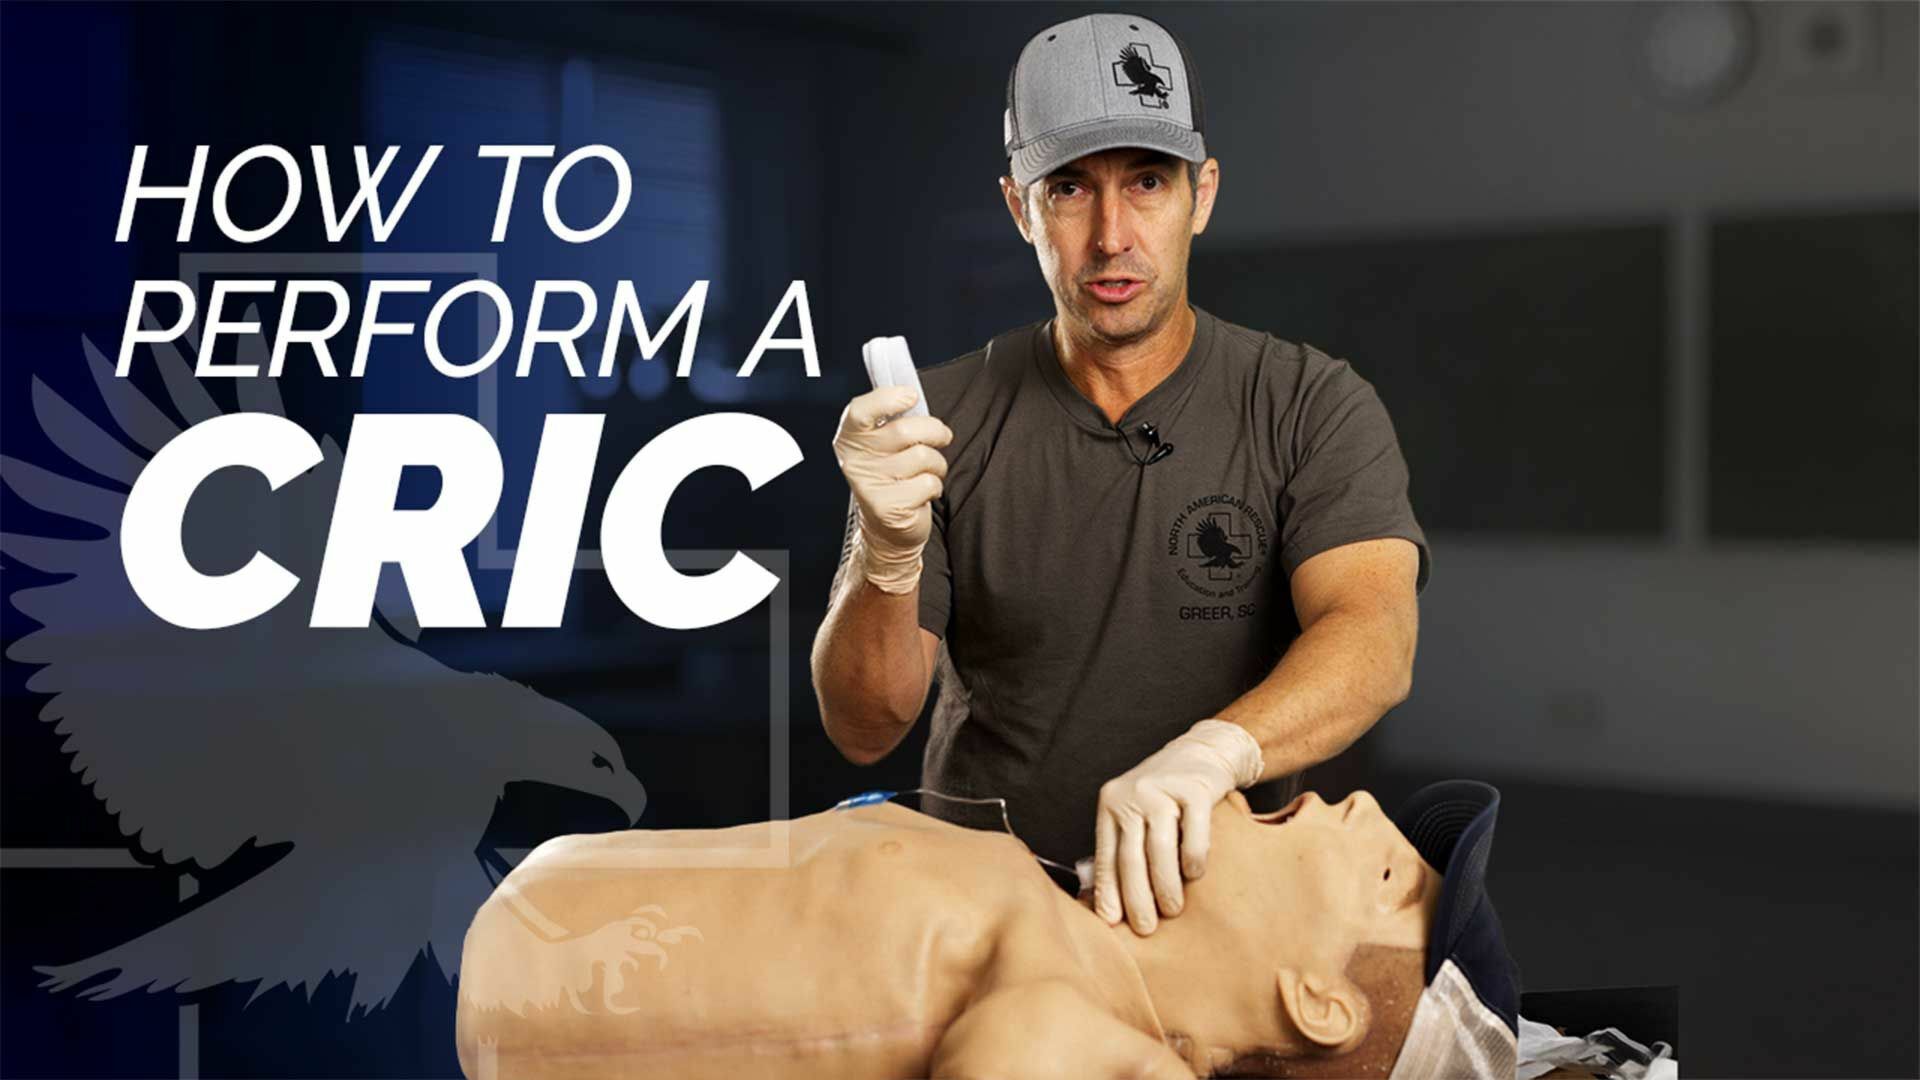 How to perform a Cric